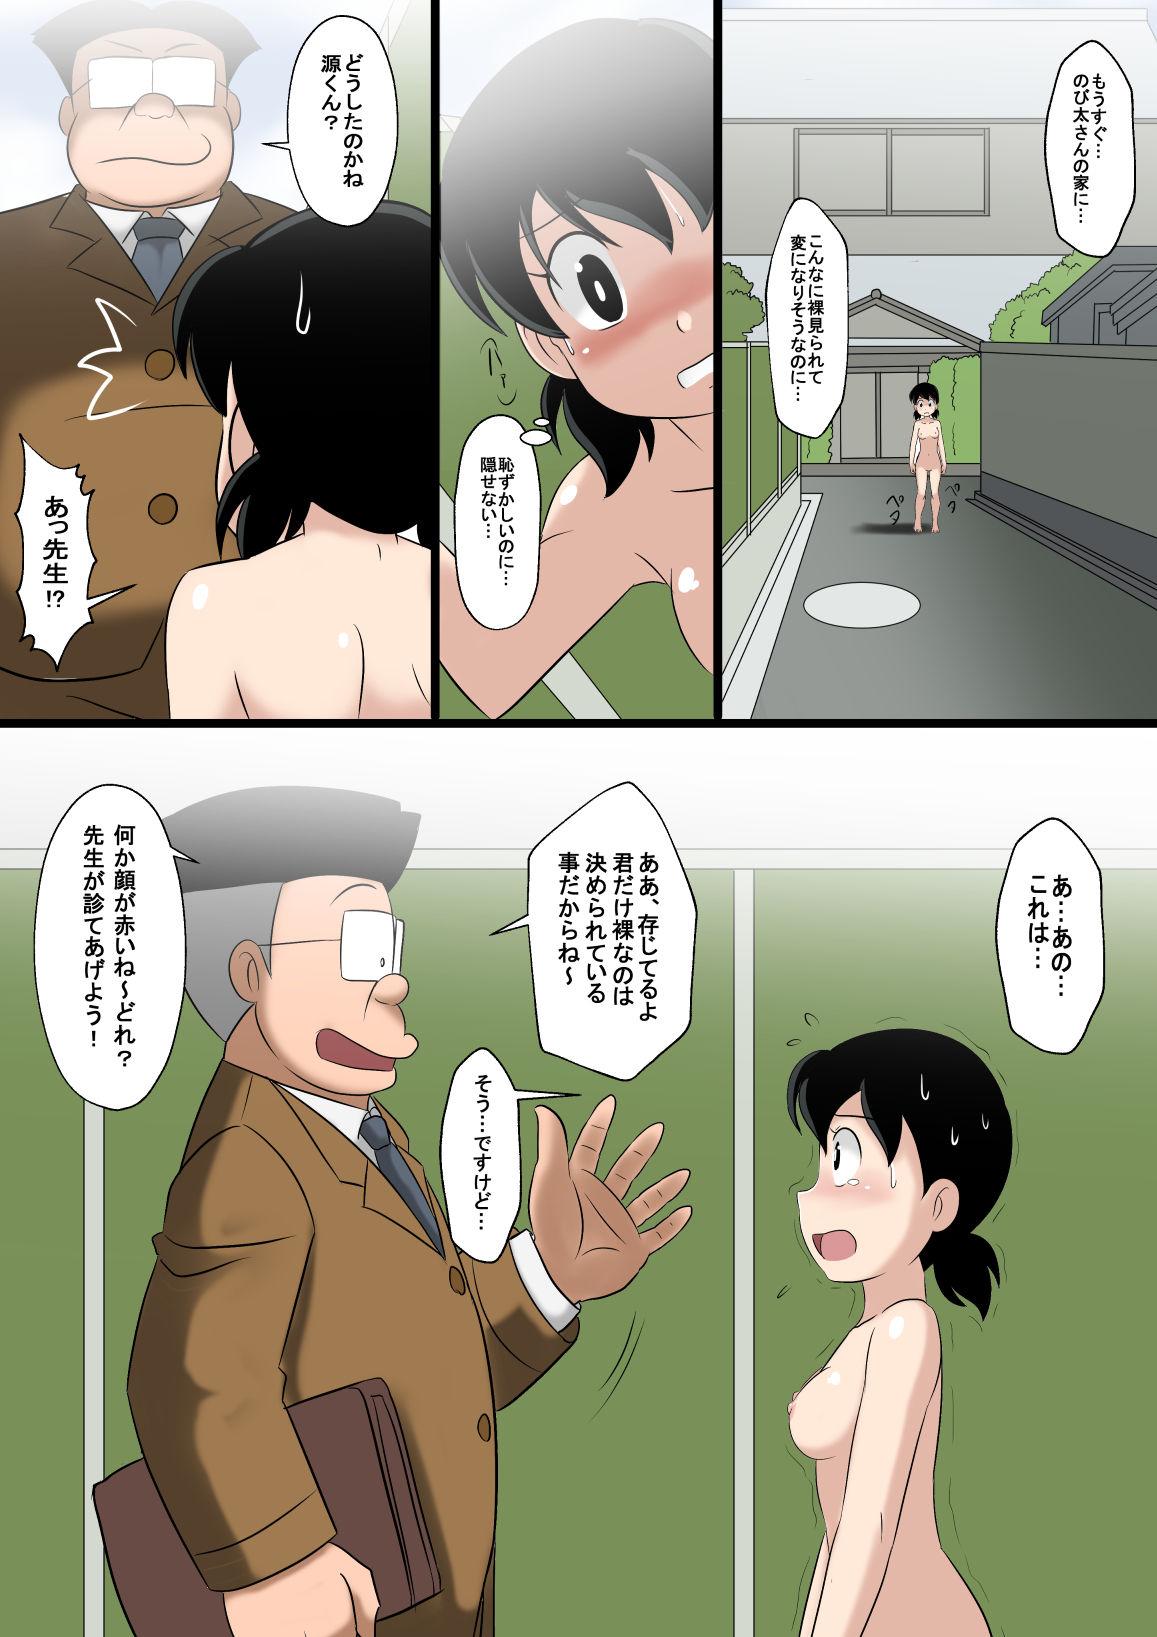 Muscles if - Doraemon Sex Tape - Page 10